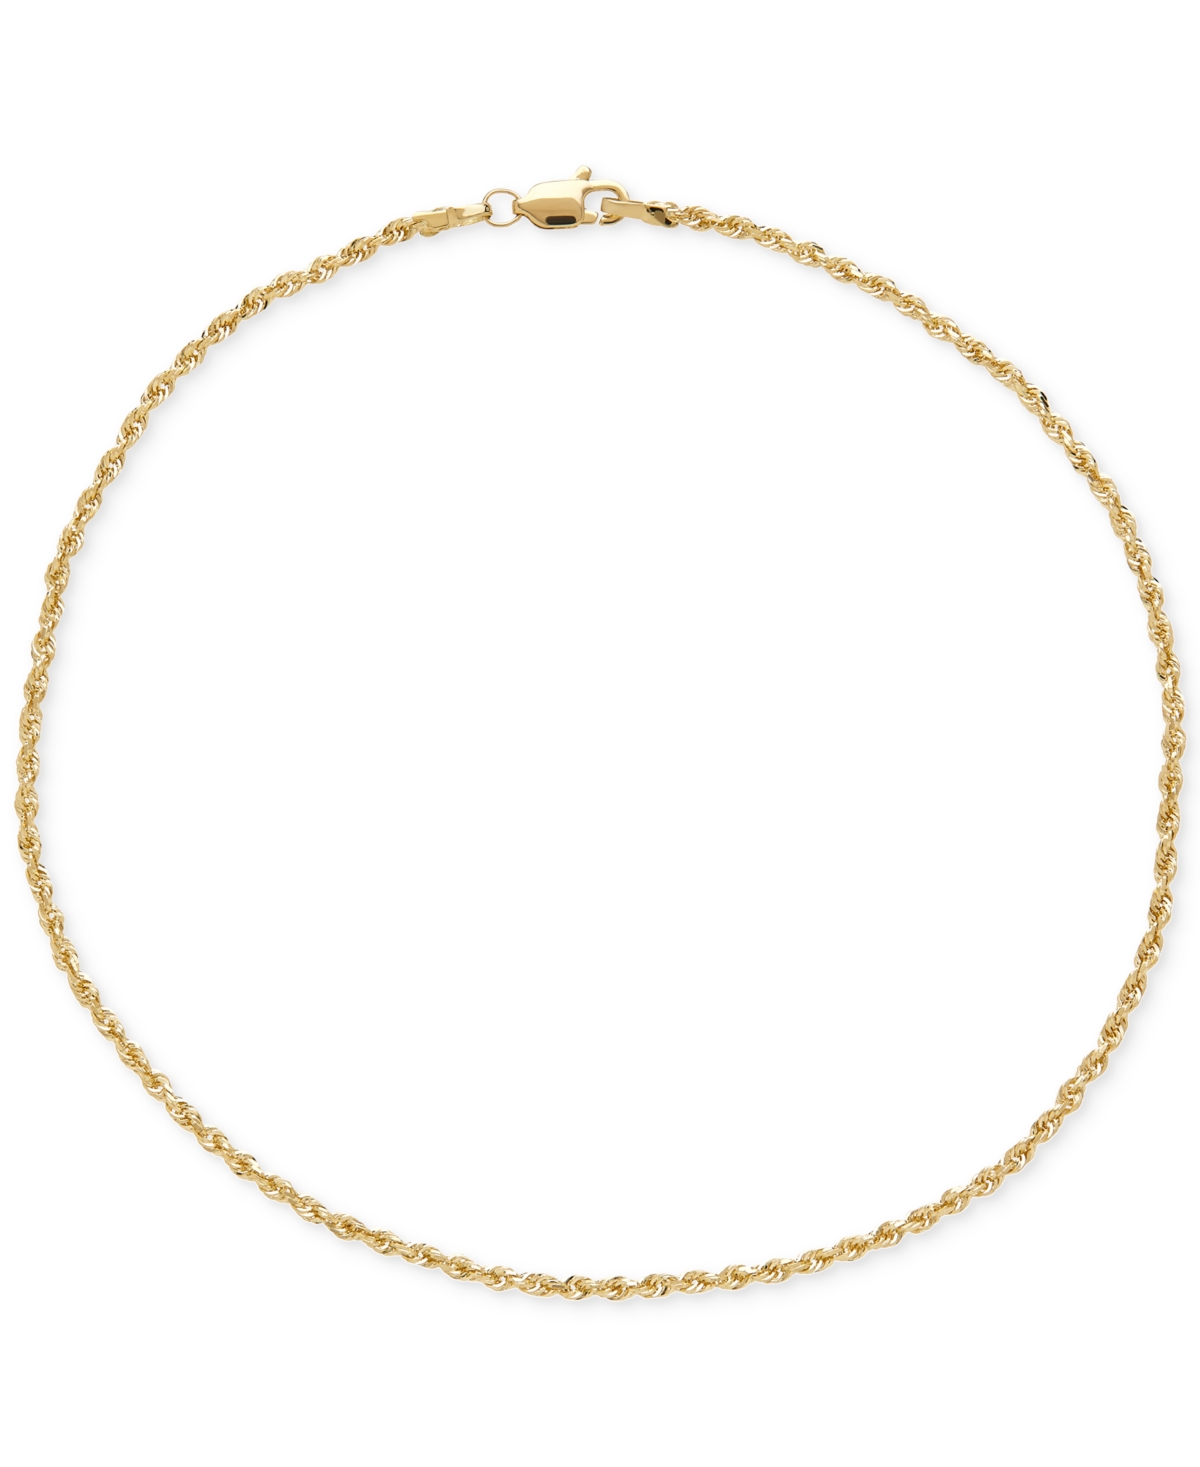 Solid Fine Rope Ankle Bracelet in 14k Gold - Yellow Gold